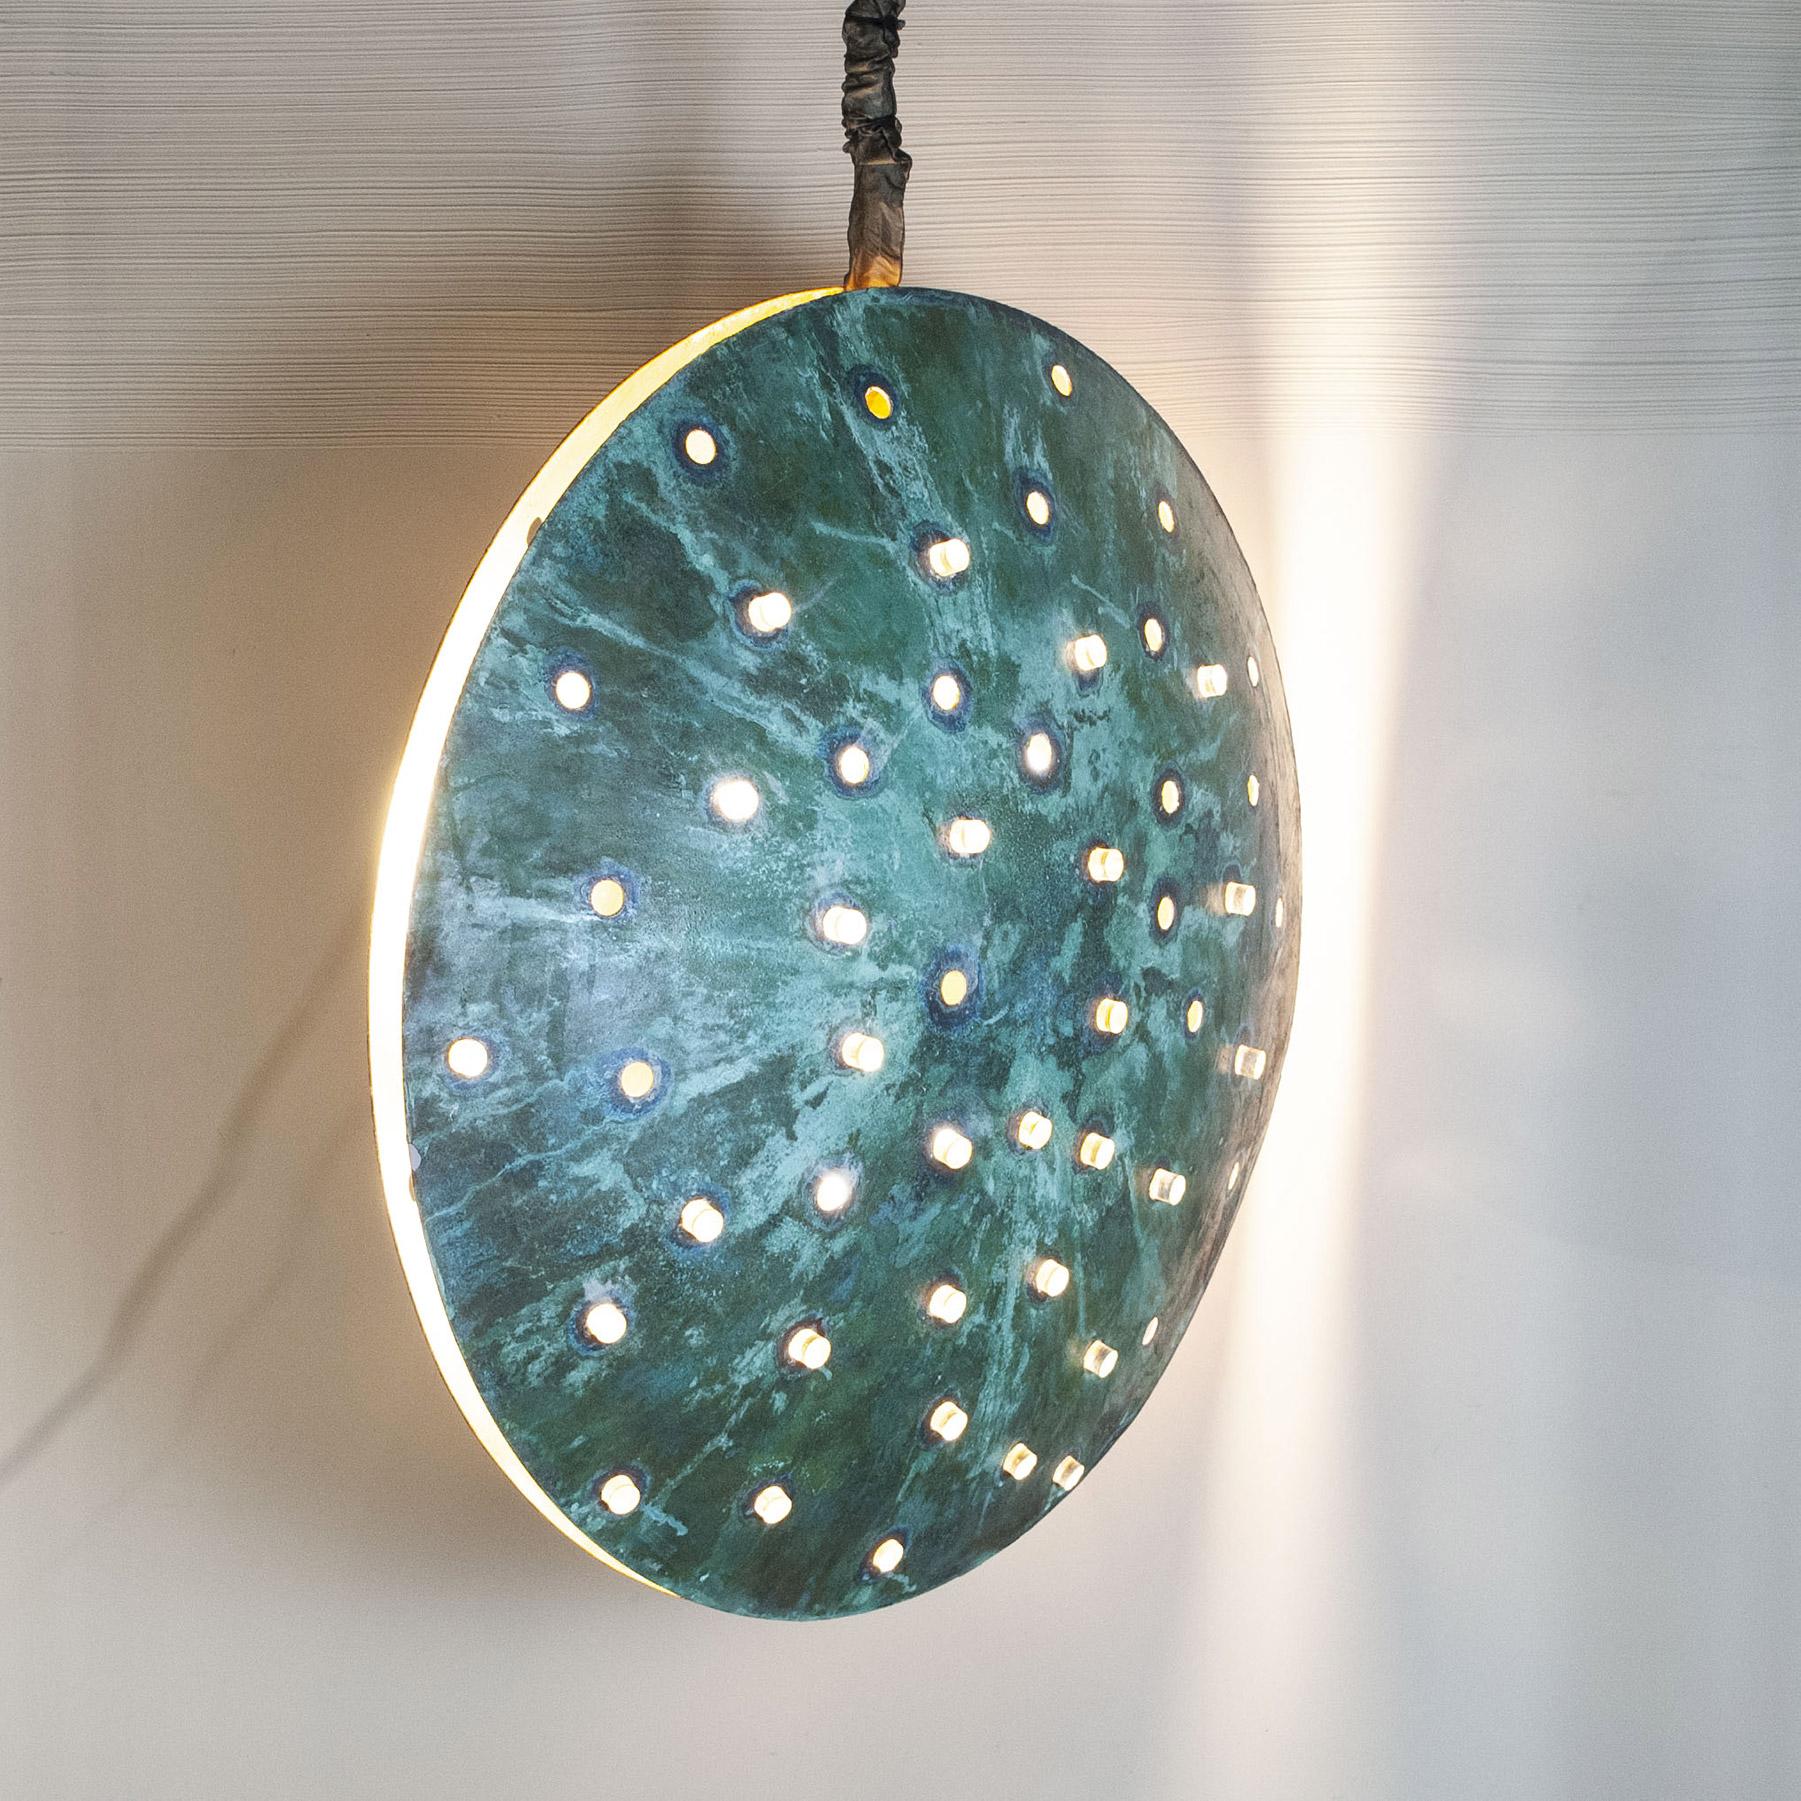 Gong Sculptural Chandelier by Cellule Creative Studio For Sale 9